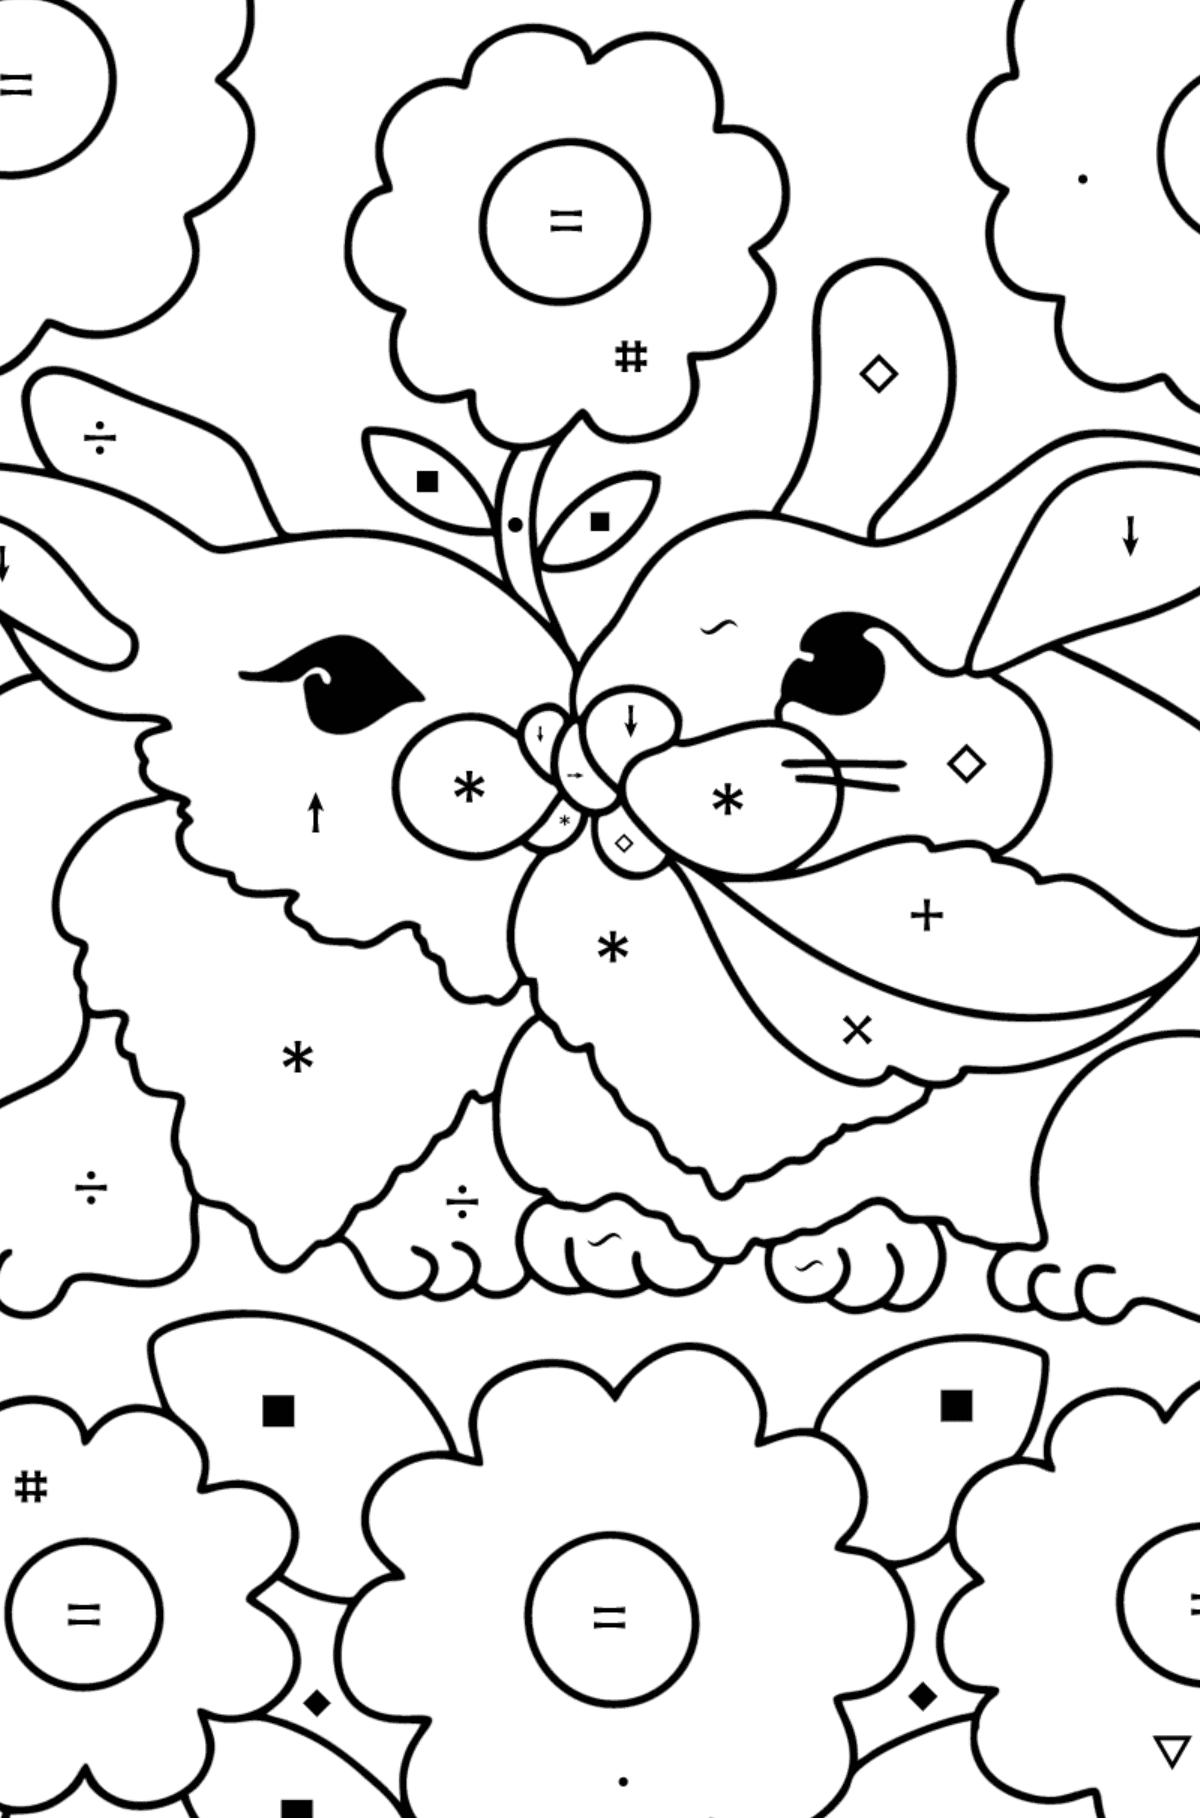 Cute Rabbits Coloring page - Coloring by Symbols for Kids